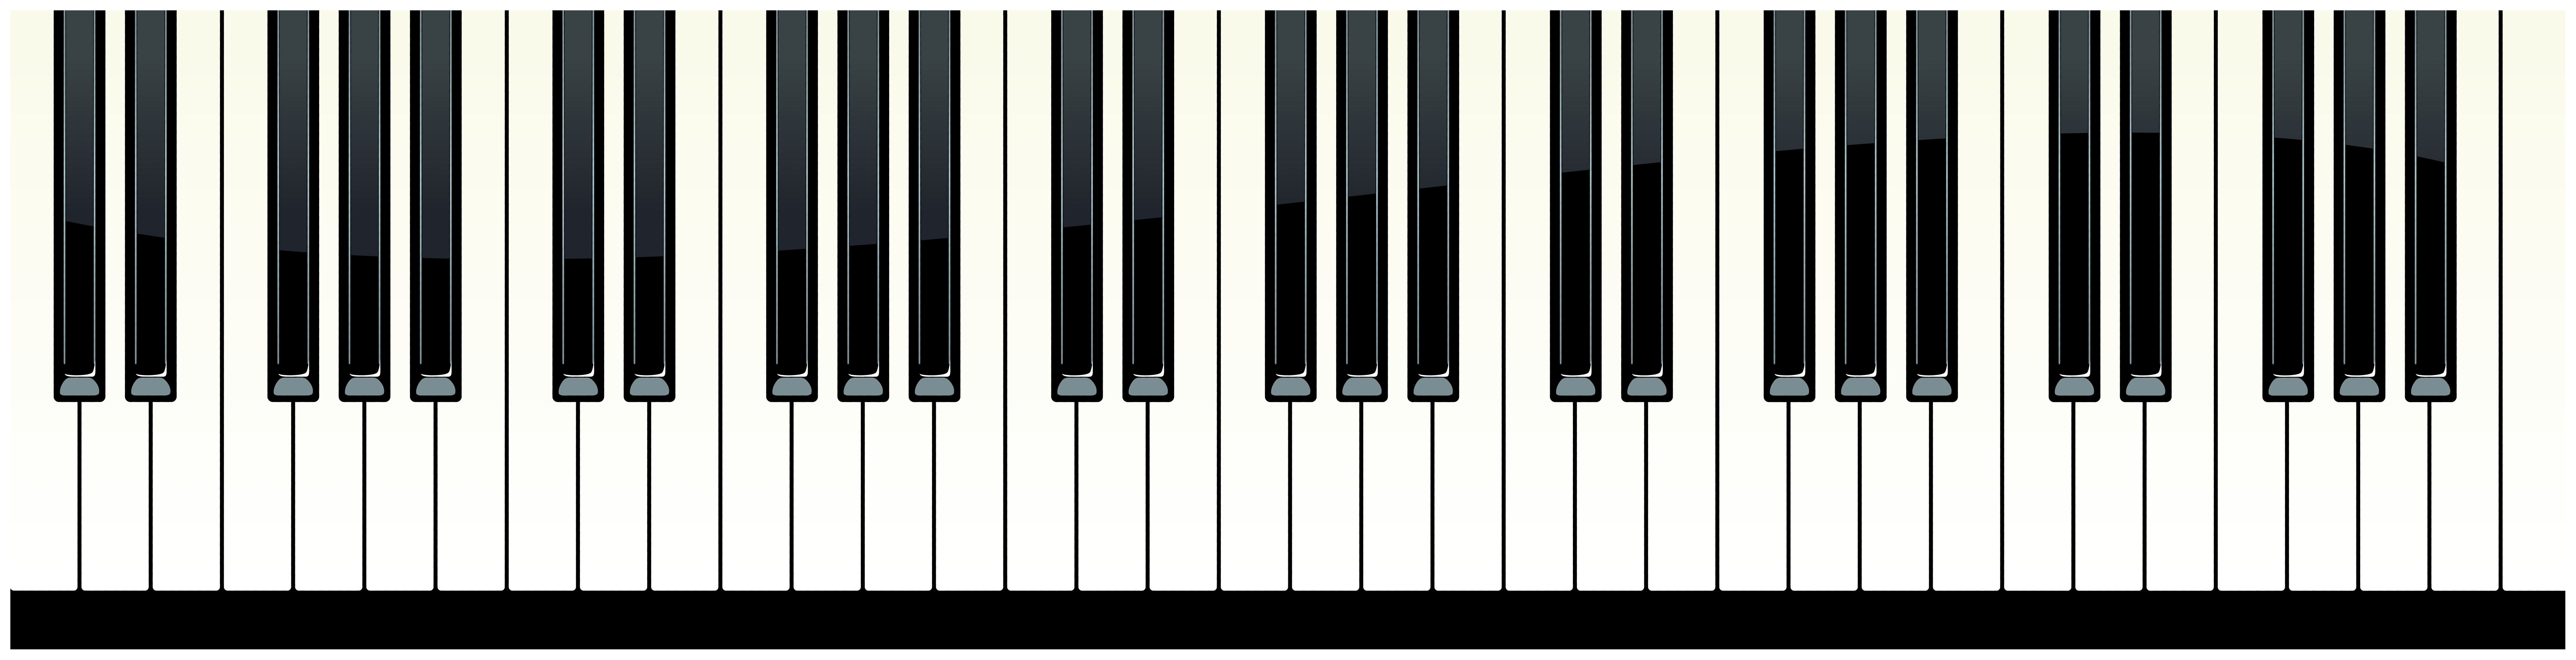 Piano Keys PNG Image in High Definition